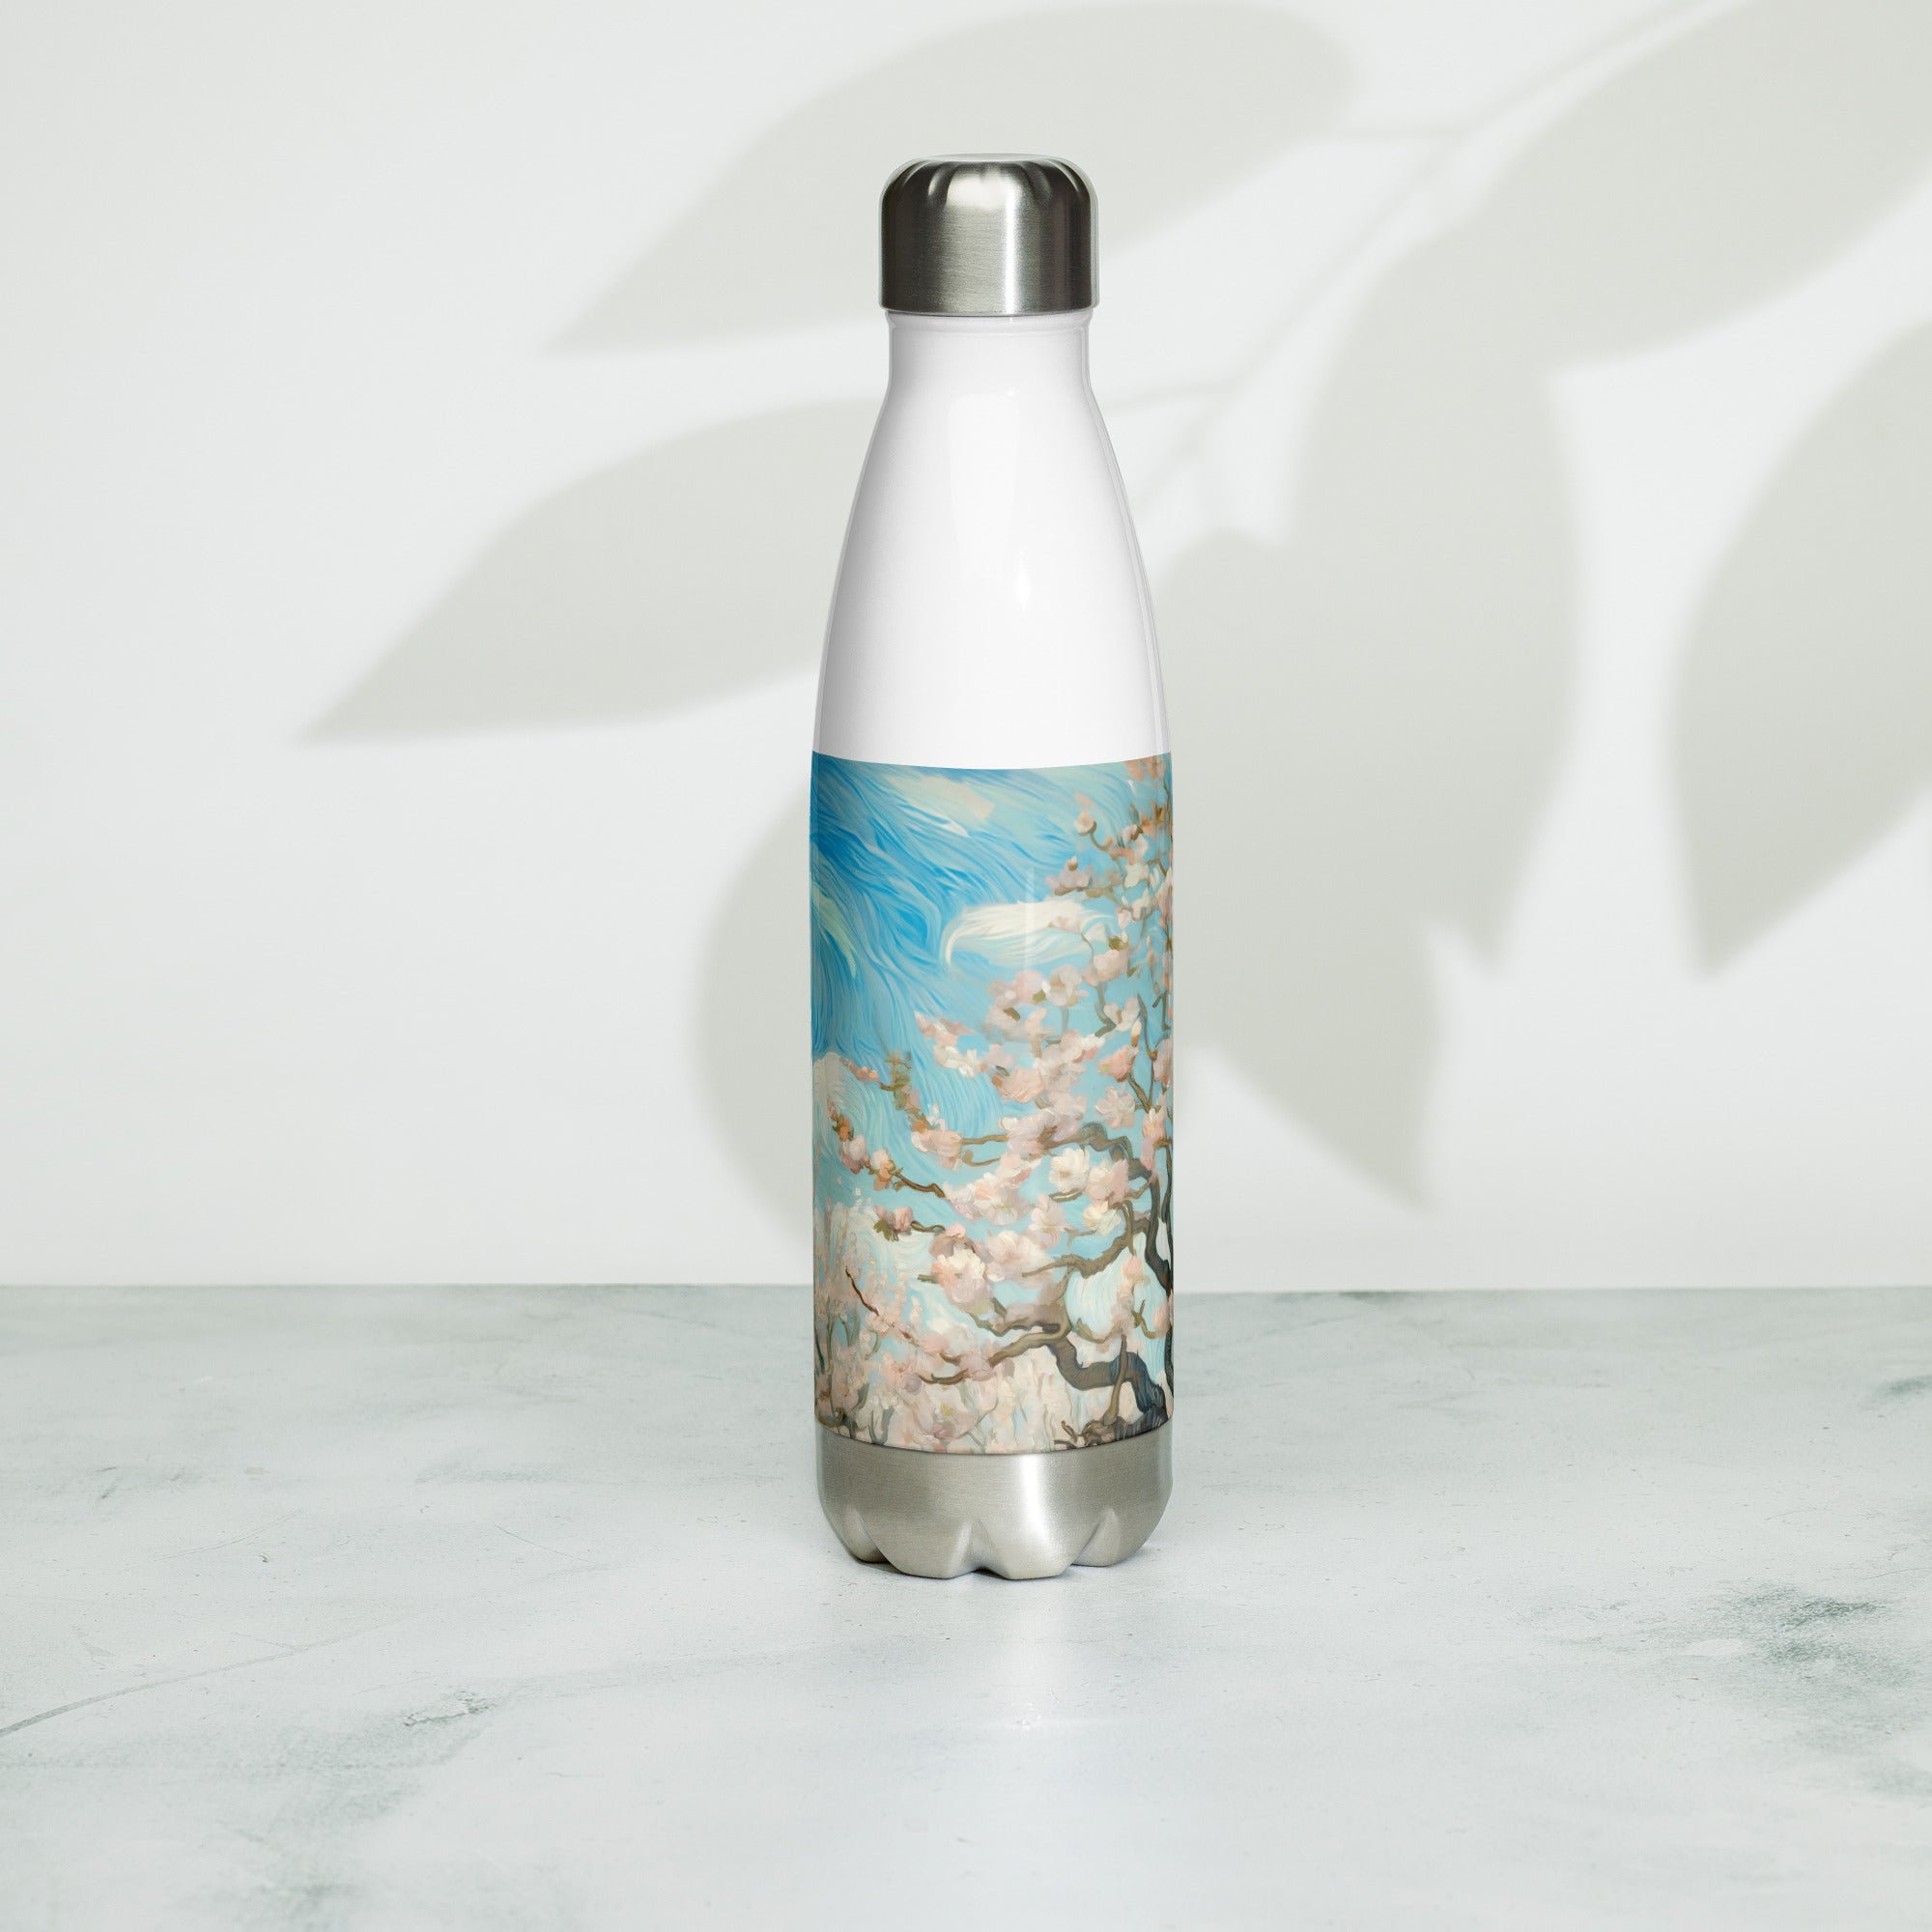 Vincent van Gogh 'Orchard in Blossom' Famous Painting Water Bottle | Stainless Steel Art Water Bottle